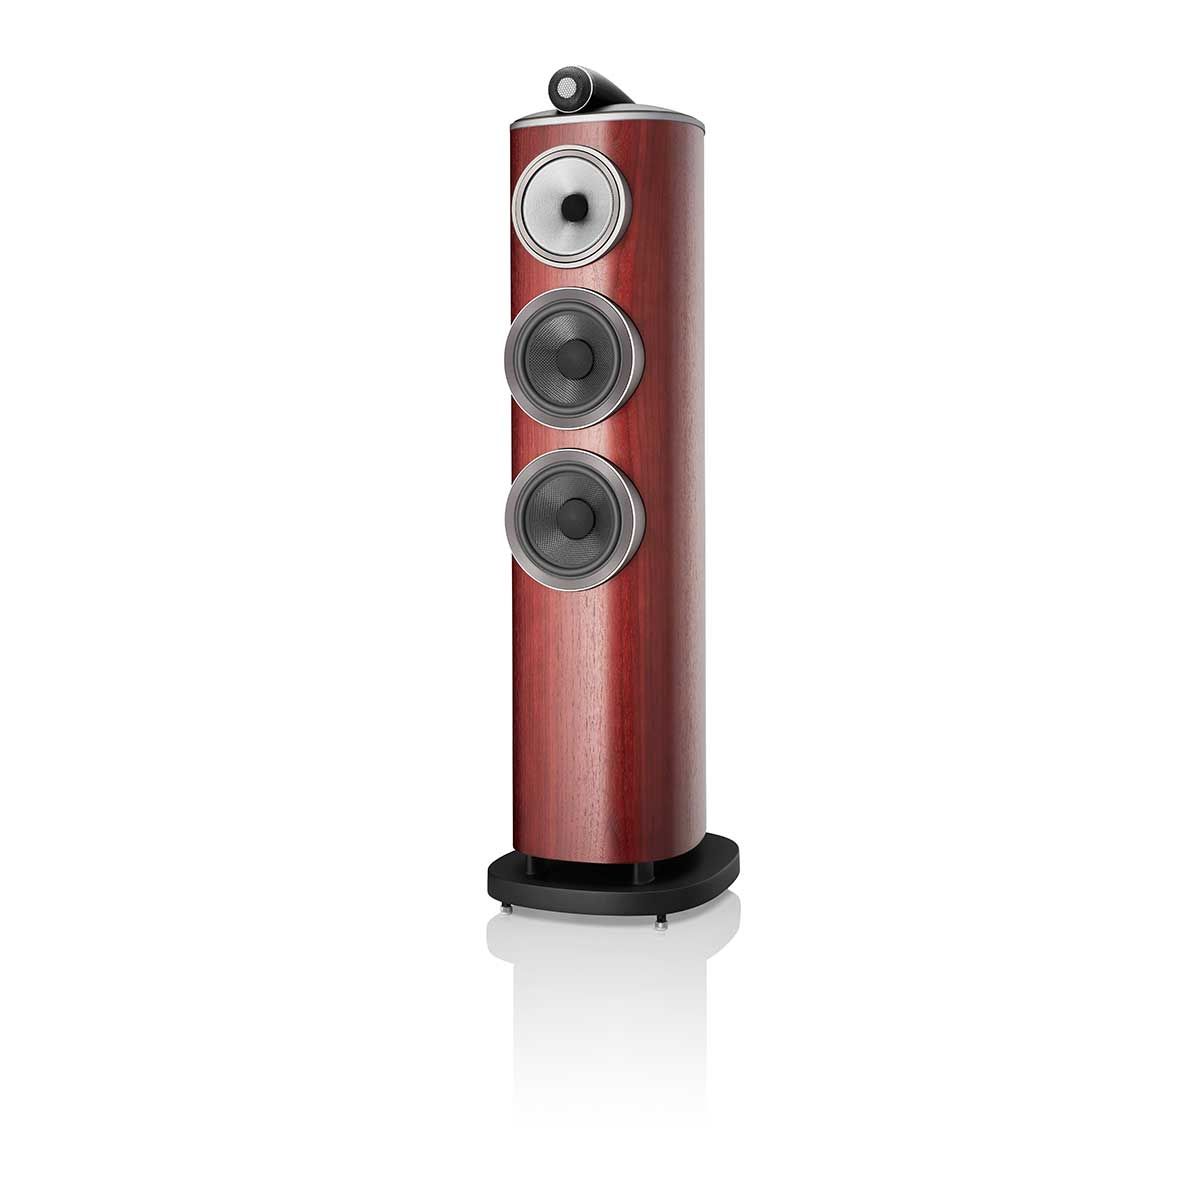 Bowers & Wilkins 804 D4 Floorstanding Speaker, Satin Rosenut, front angle without grille